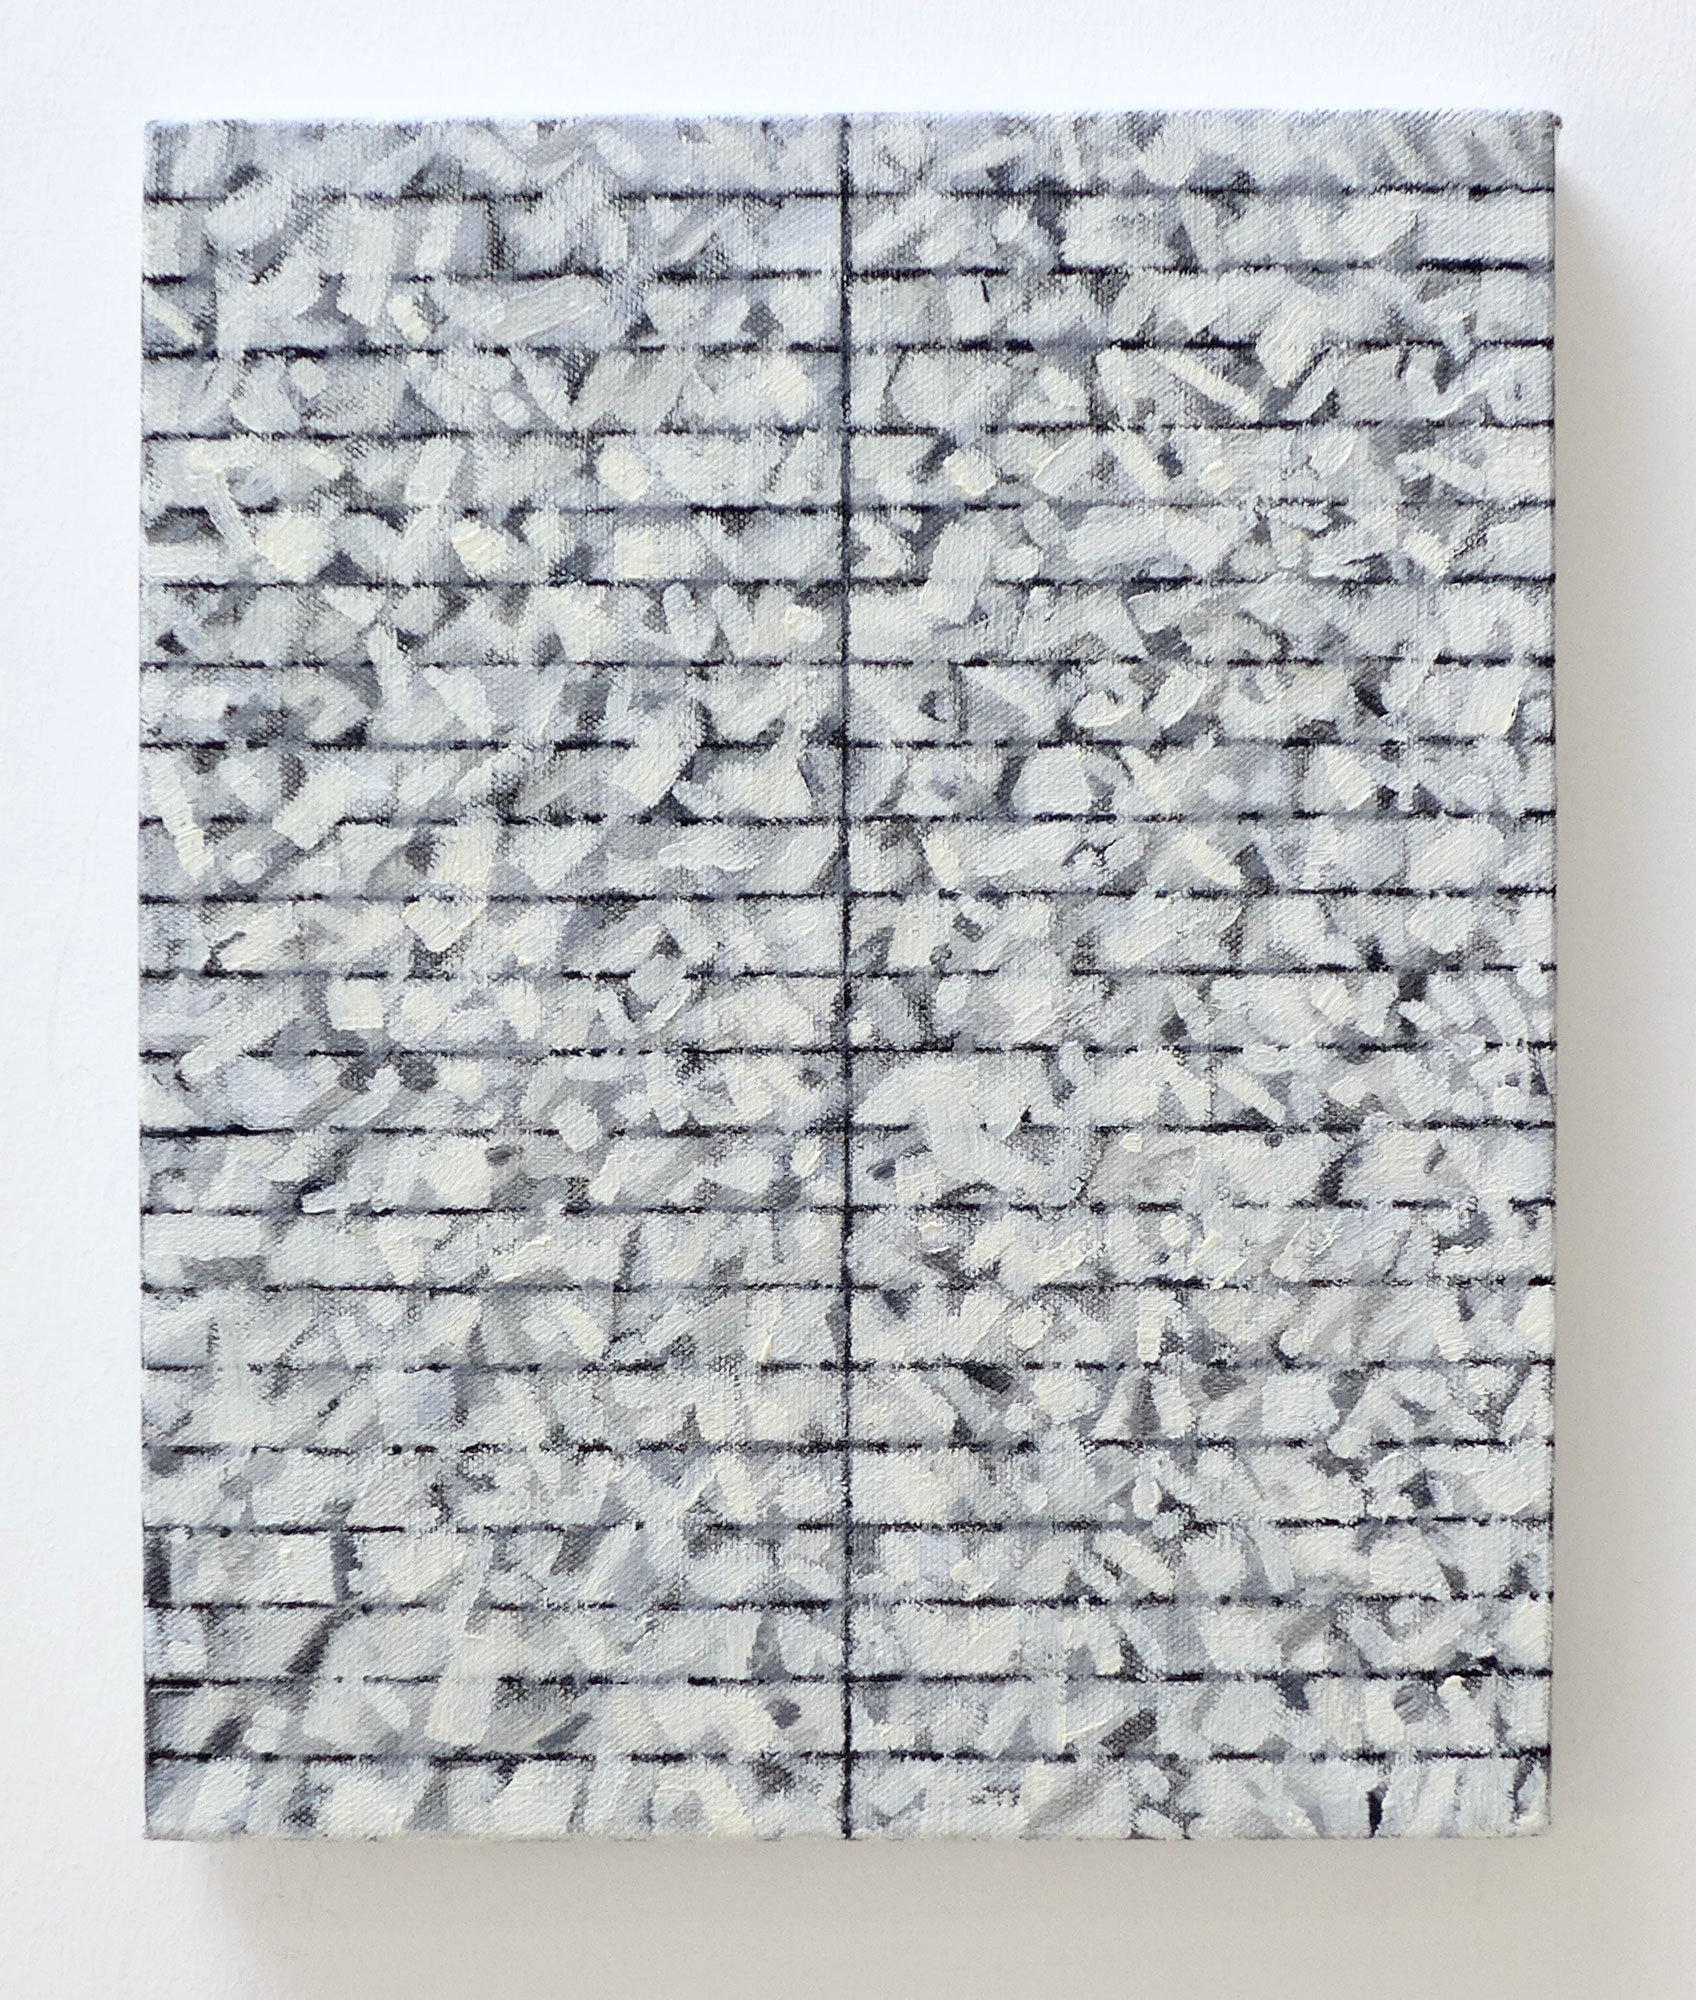 Kenneth Dingwall, Balance (in), 2000, oil and graphite on canvas, 28cm x 23cm